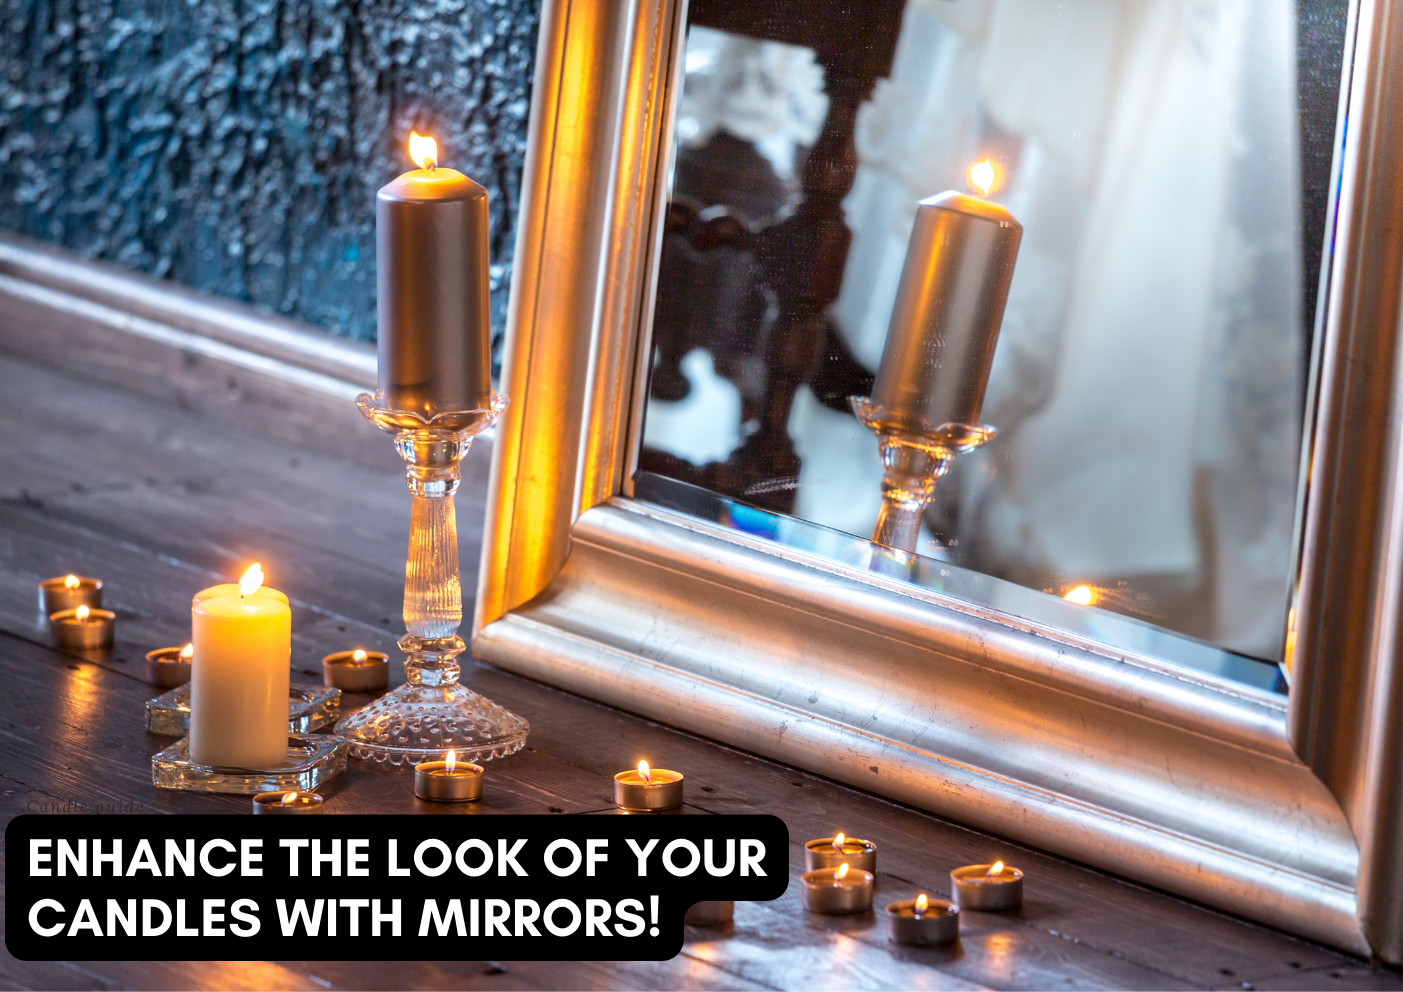 Enhance the Look of Your Candles with Mirrors!